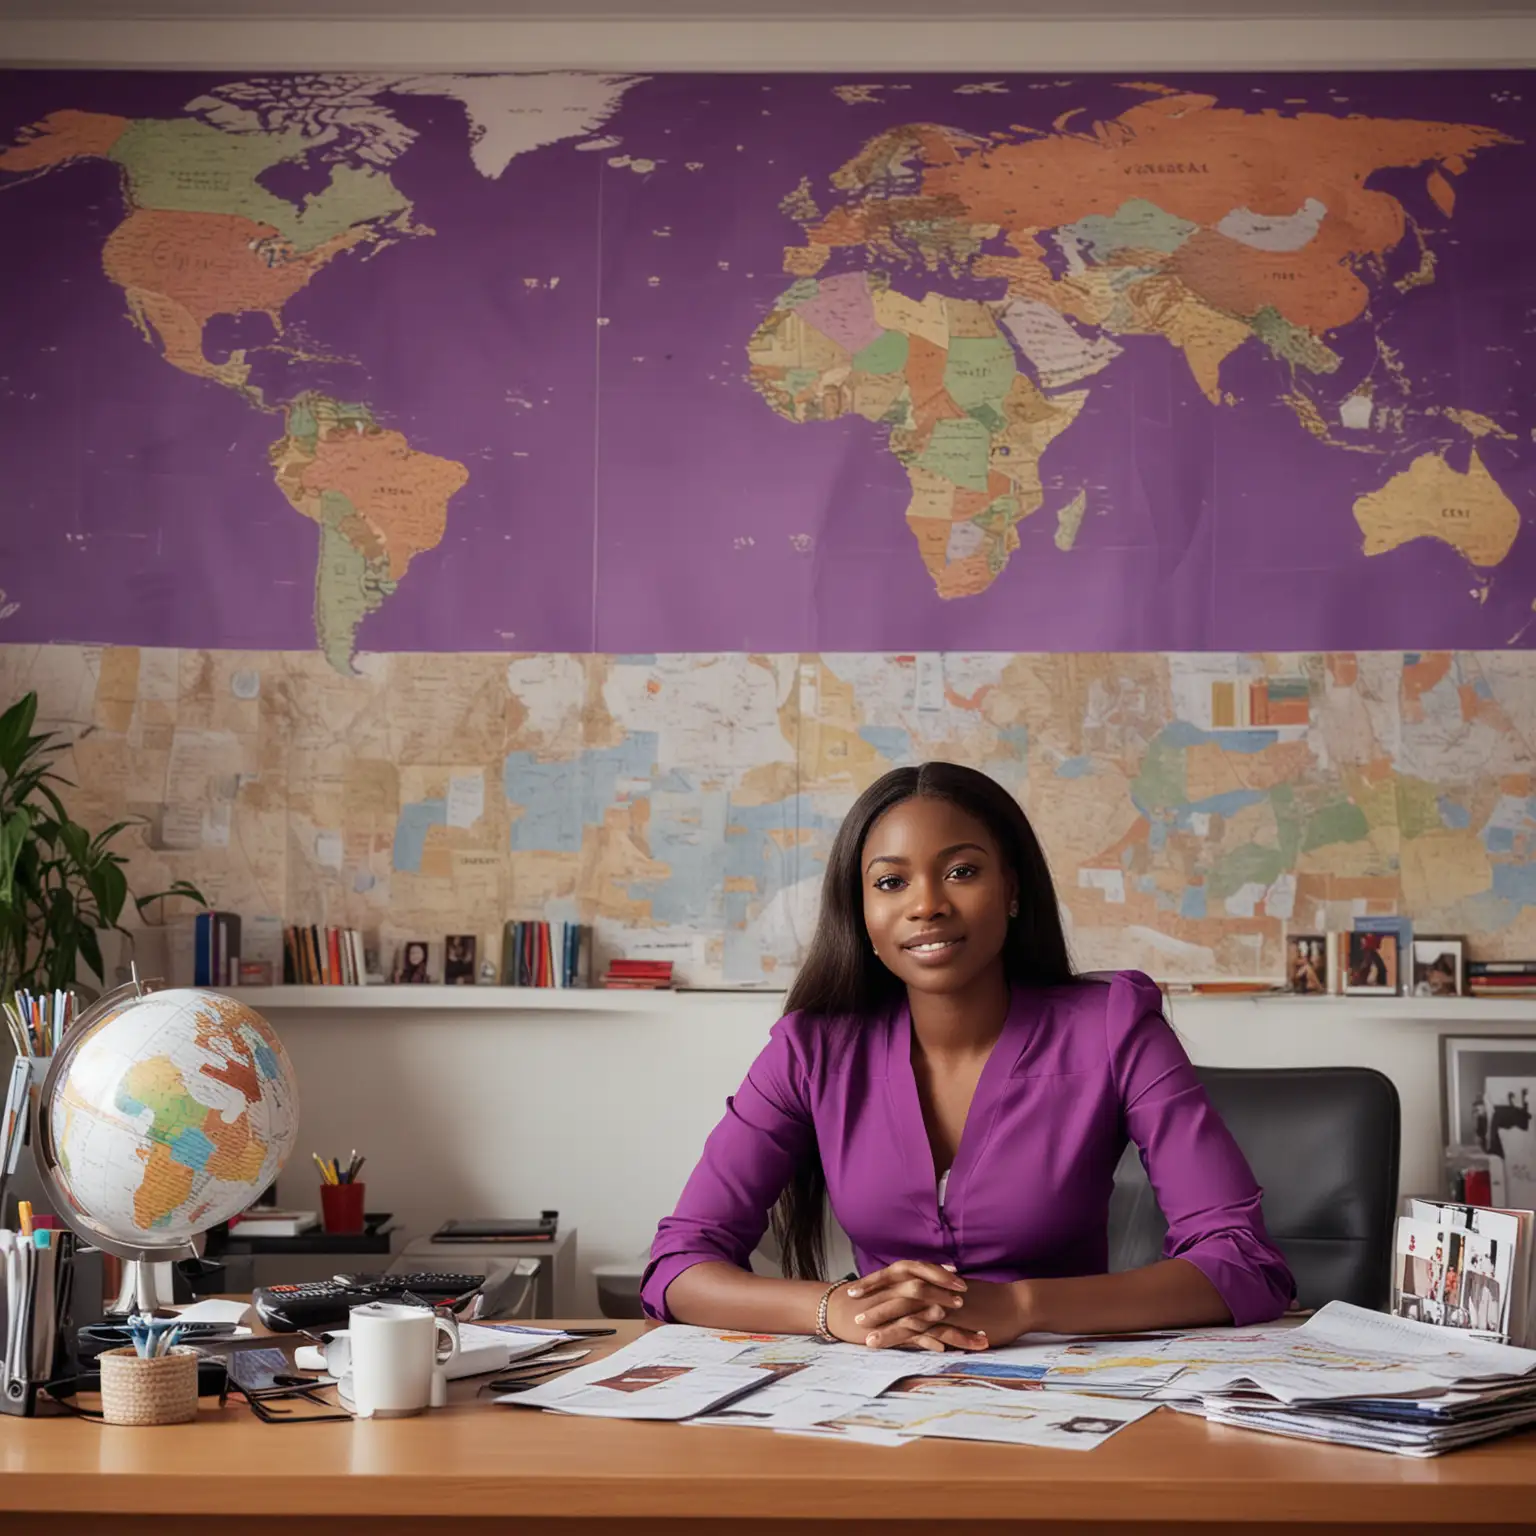 A photorealistic portrait of a 32-year-old Nigerian professional woman, sitting in her office which mirrors her global experiences. Dressed in a purple top emblazoned with 'Goal Getter Only' and white trousers, she addresses the camera with an open, welcoming gesture. The backdrop is an office space adorned with colorful world maps and national flags, with a collection of global mementos.Her office features modern devices like sleek tablets for browsing university programs around the world. The natural light floods the office, highlighting her engaging expression and the vivid details of her surroundings.